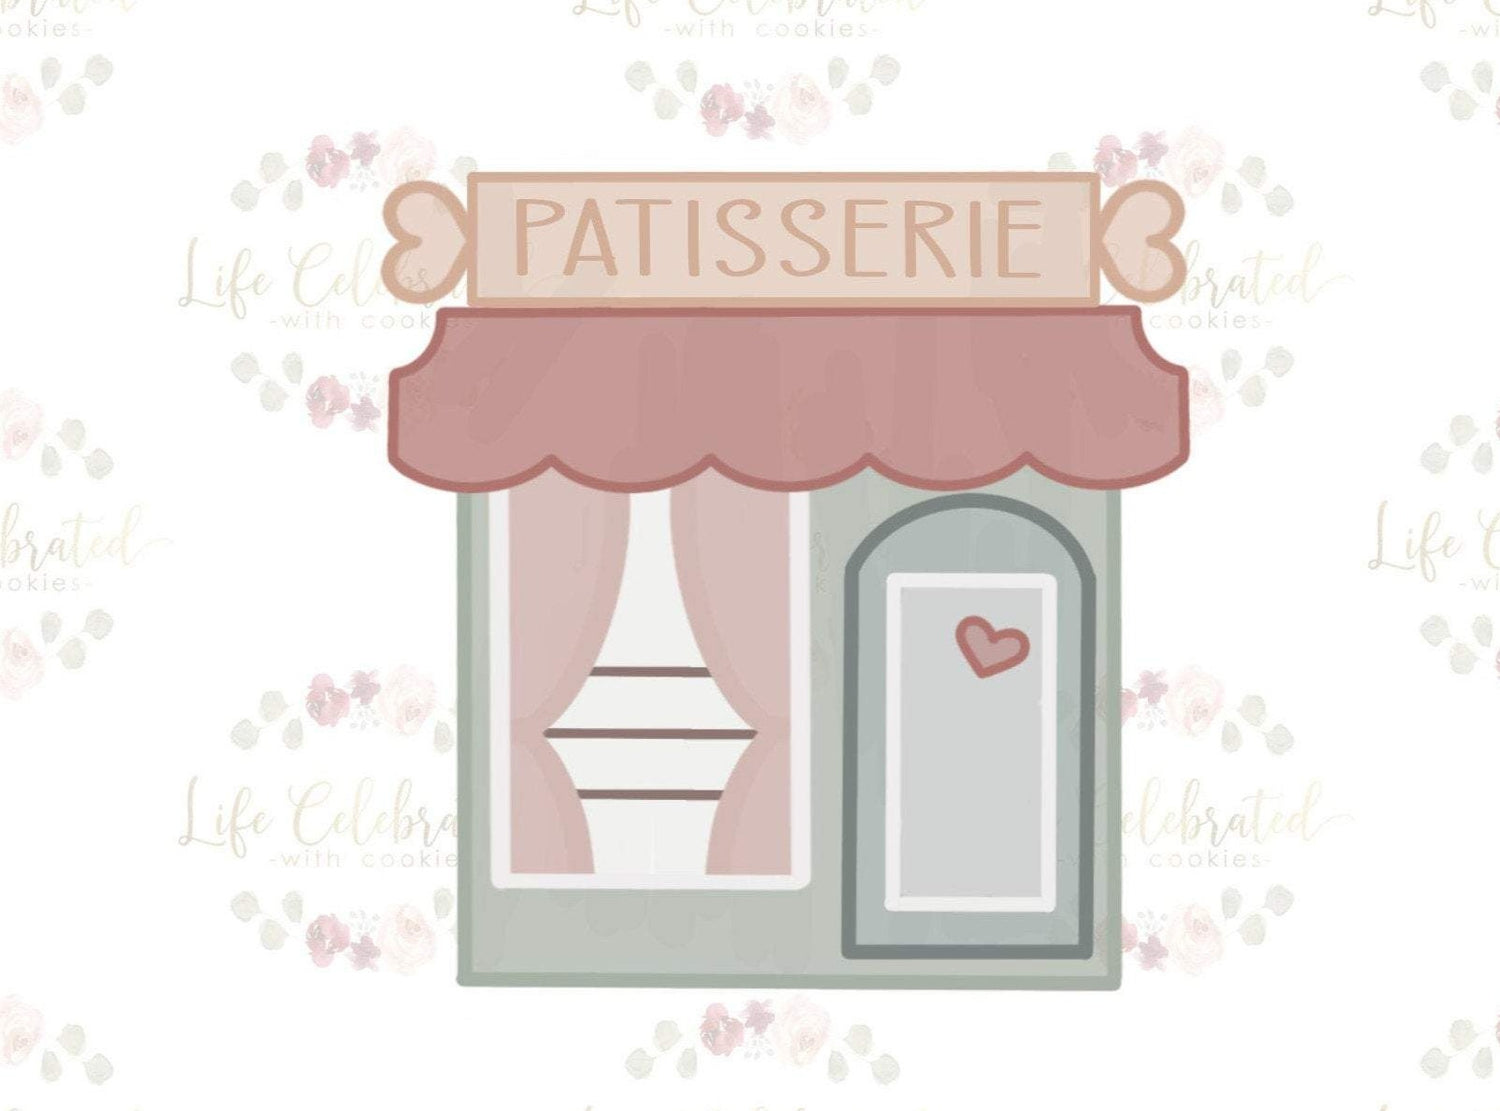 Bakery Patisserie Store Front Cookie Cutter